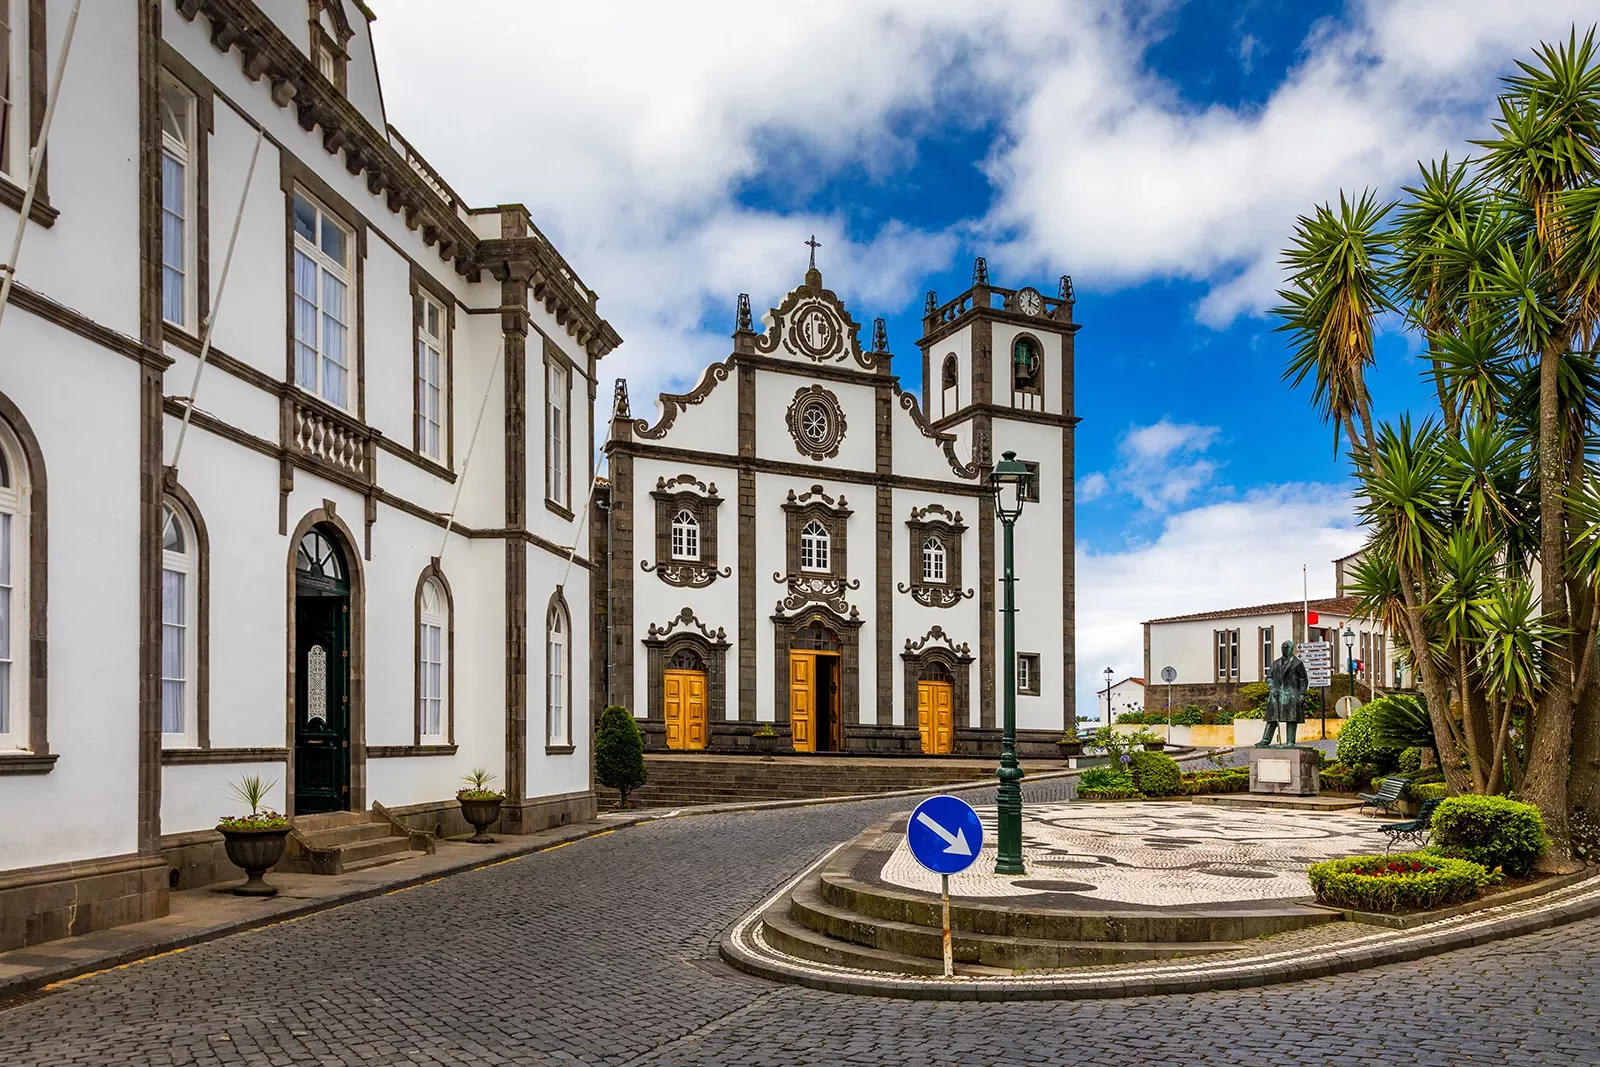 Nordeste village with white town buildings on the island of Sao Miguel, Azores, Portugal.